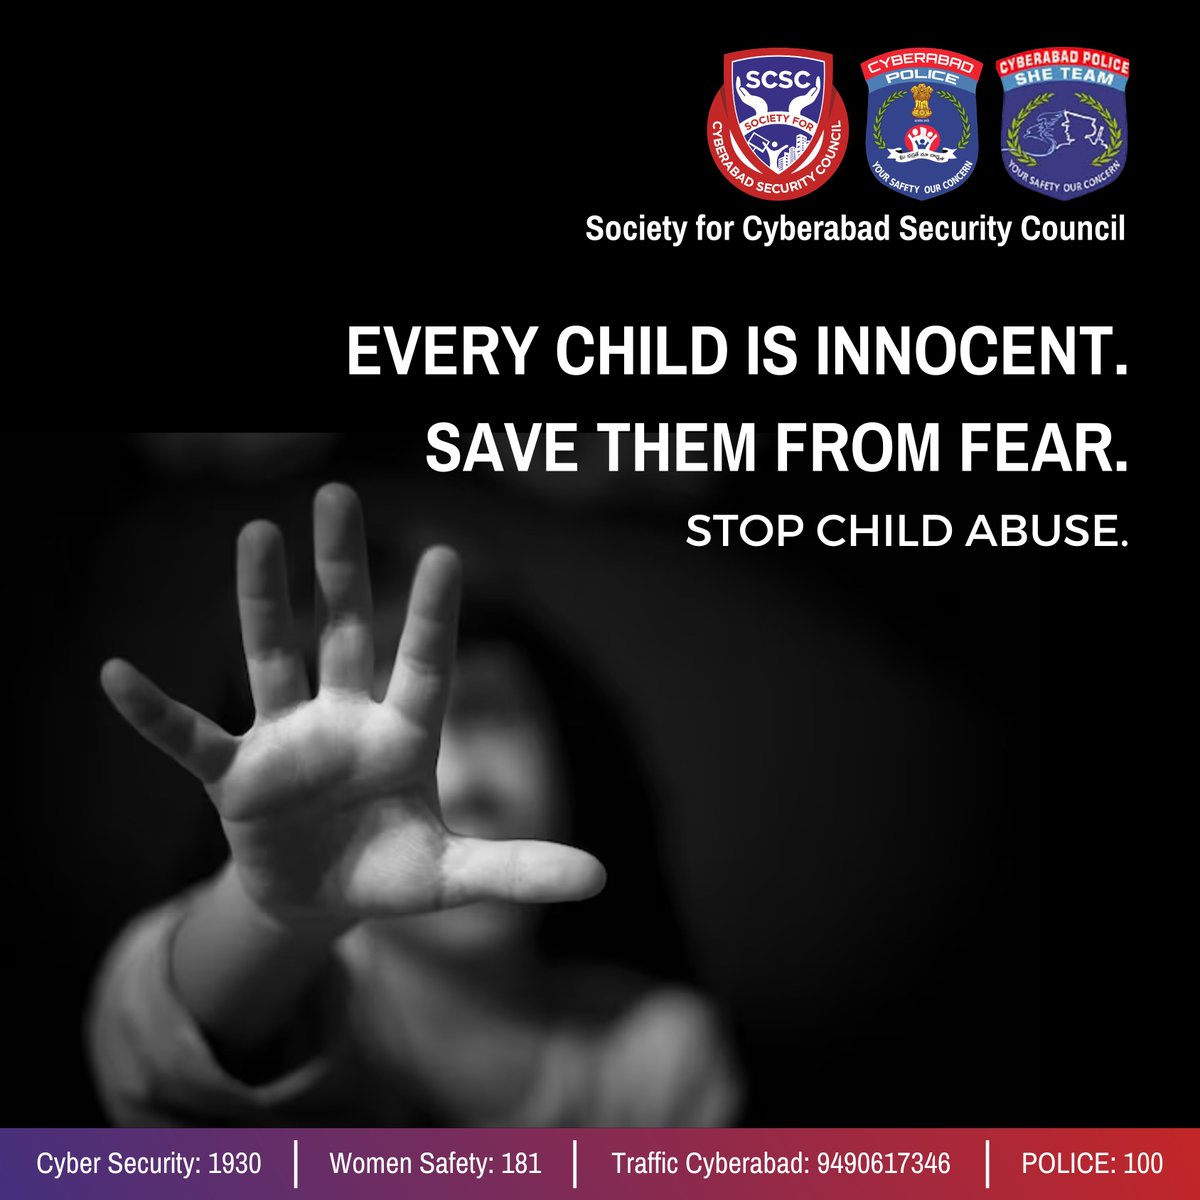 🚸💙 Every Child is Innocent. Let's Save Them from Fear. 💙🚸 Children deserve a childhood free from fear and harm. It's our collective responsibility to protect them and ensure their safety. Let's unite in our commitment to safeguarding the innocence of every child. Together